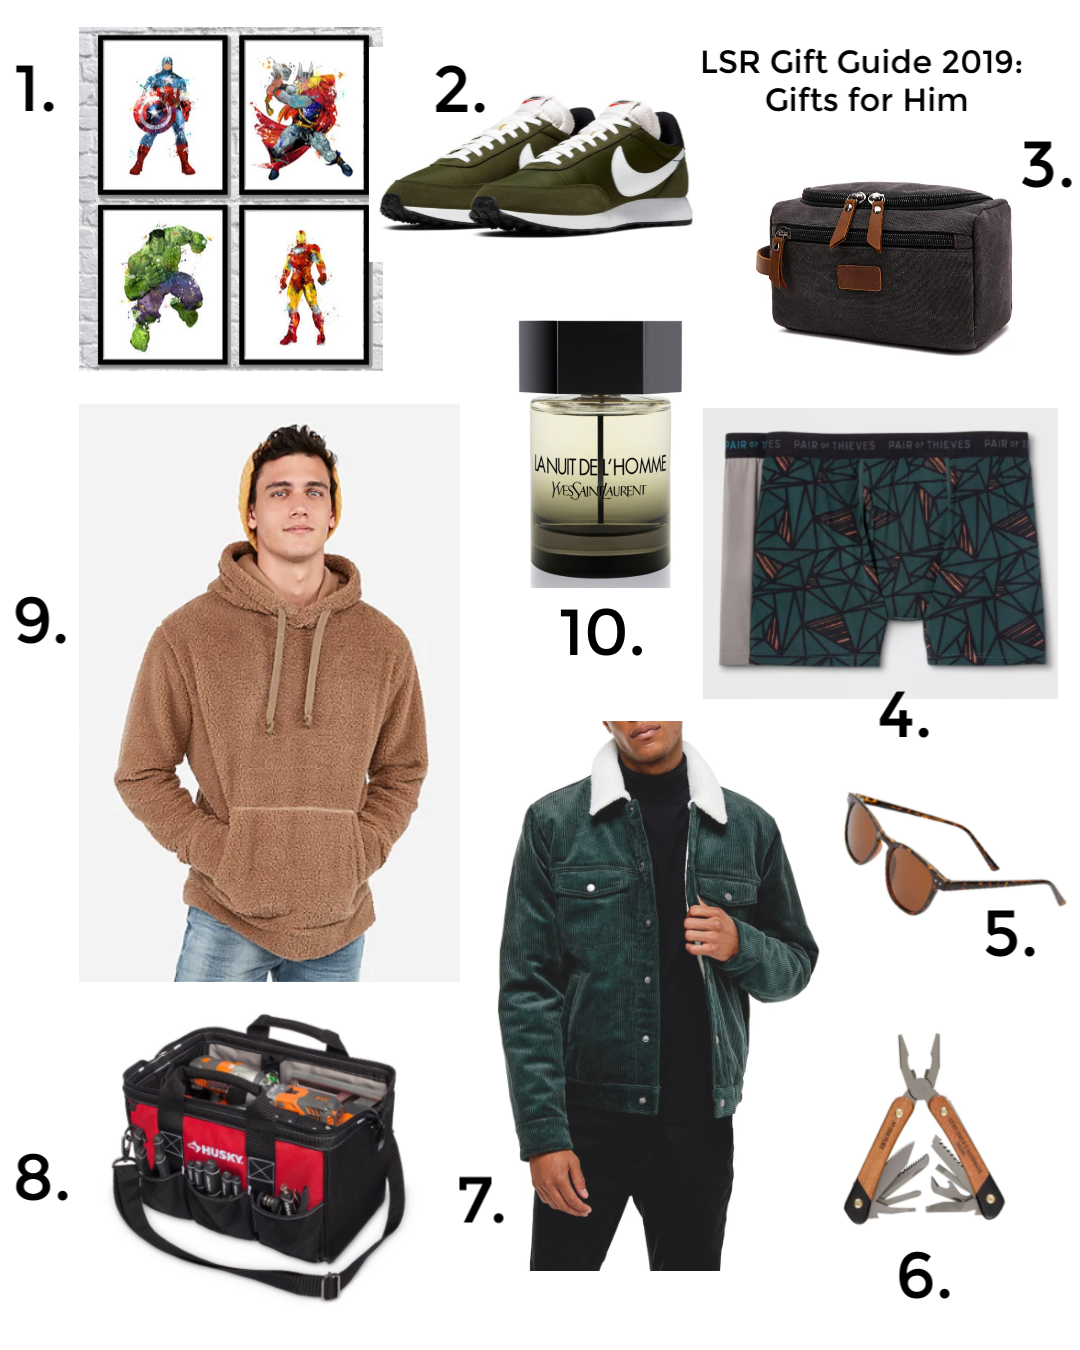 LSR Gift Guide 2019: Gifts for Him